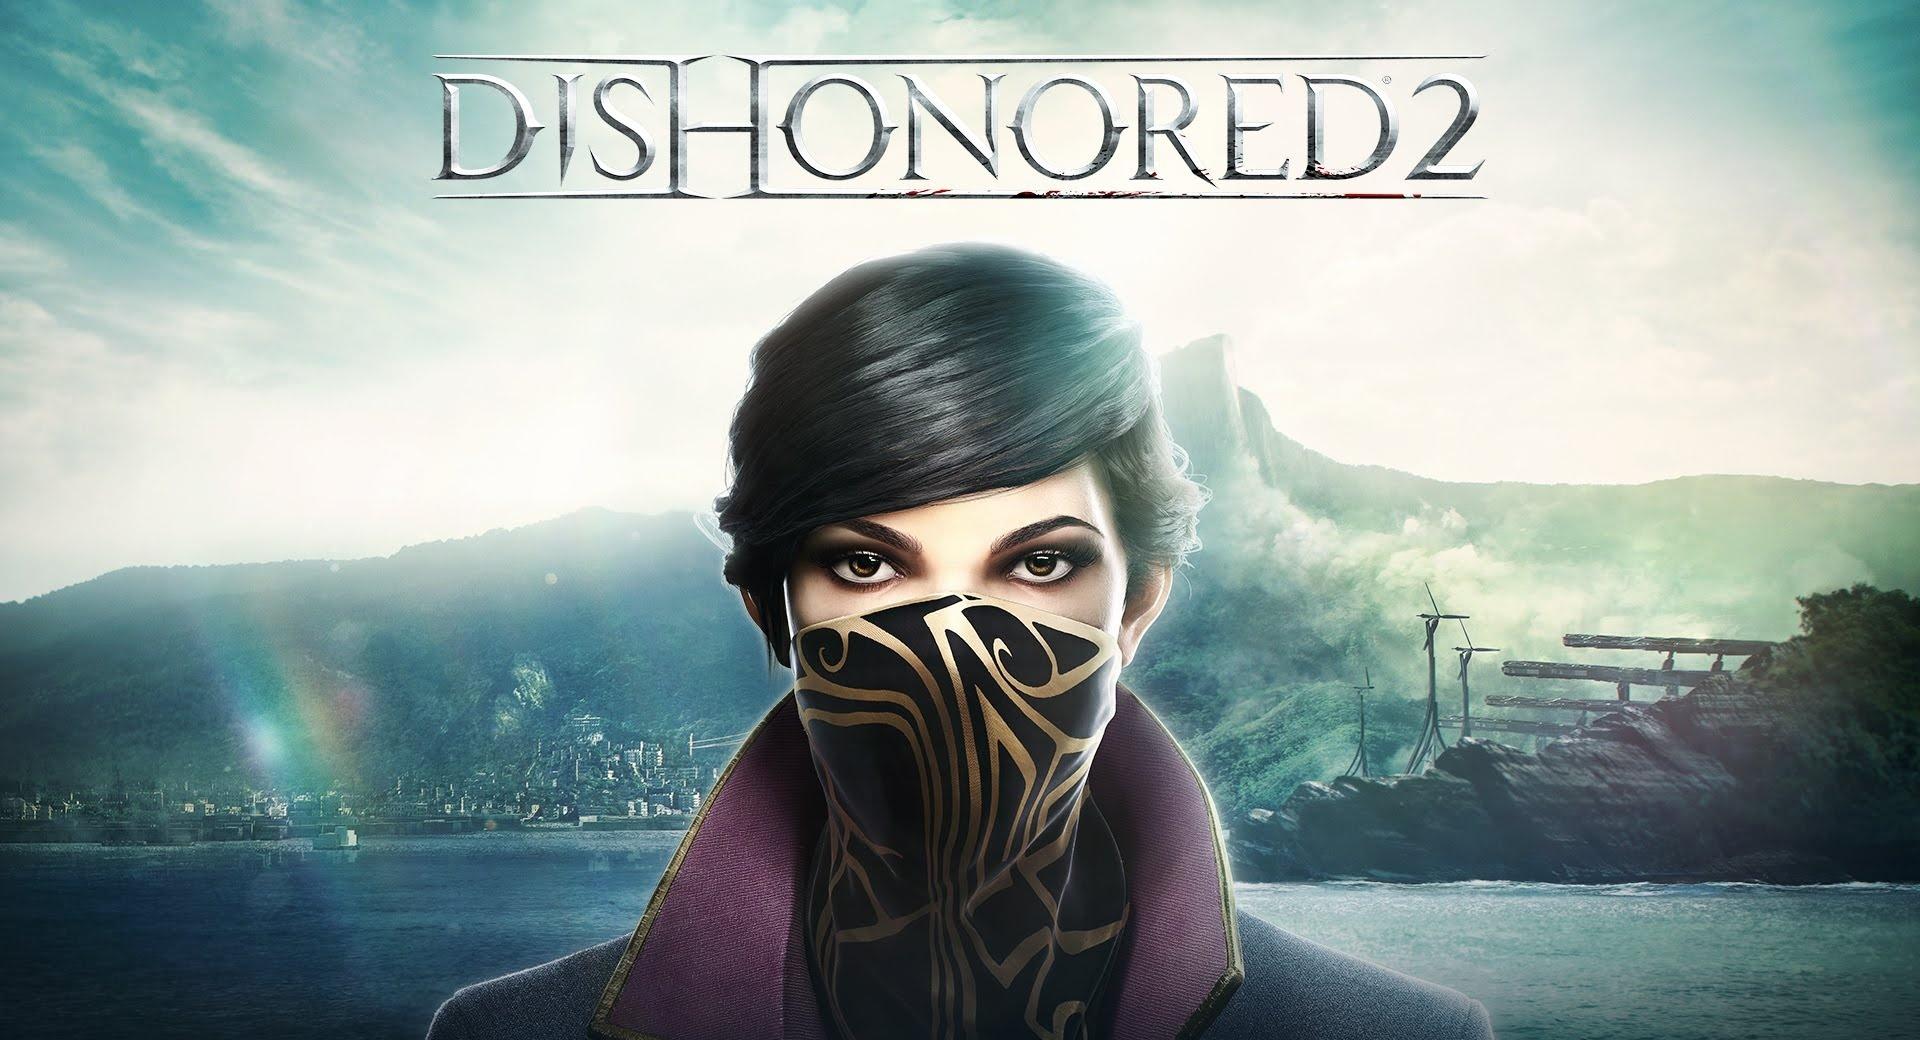 Emily Dishonored 2 wallpapers HD quality